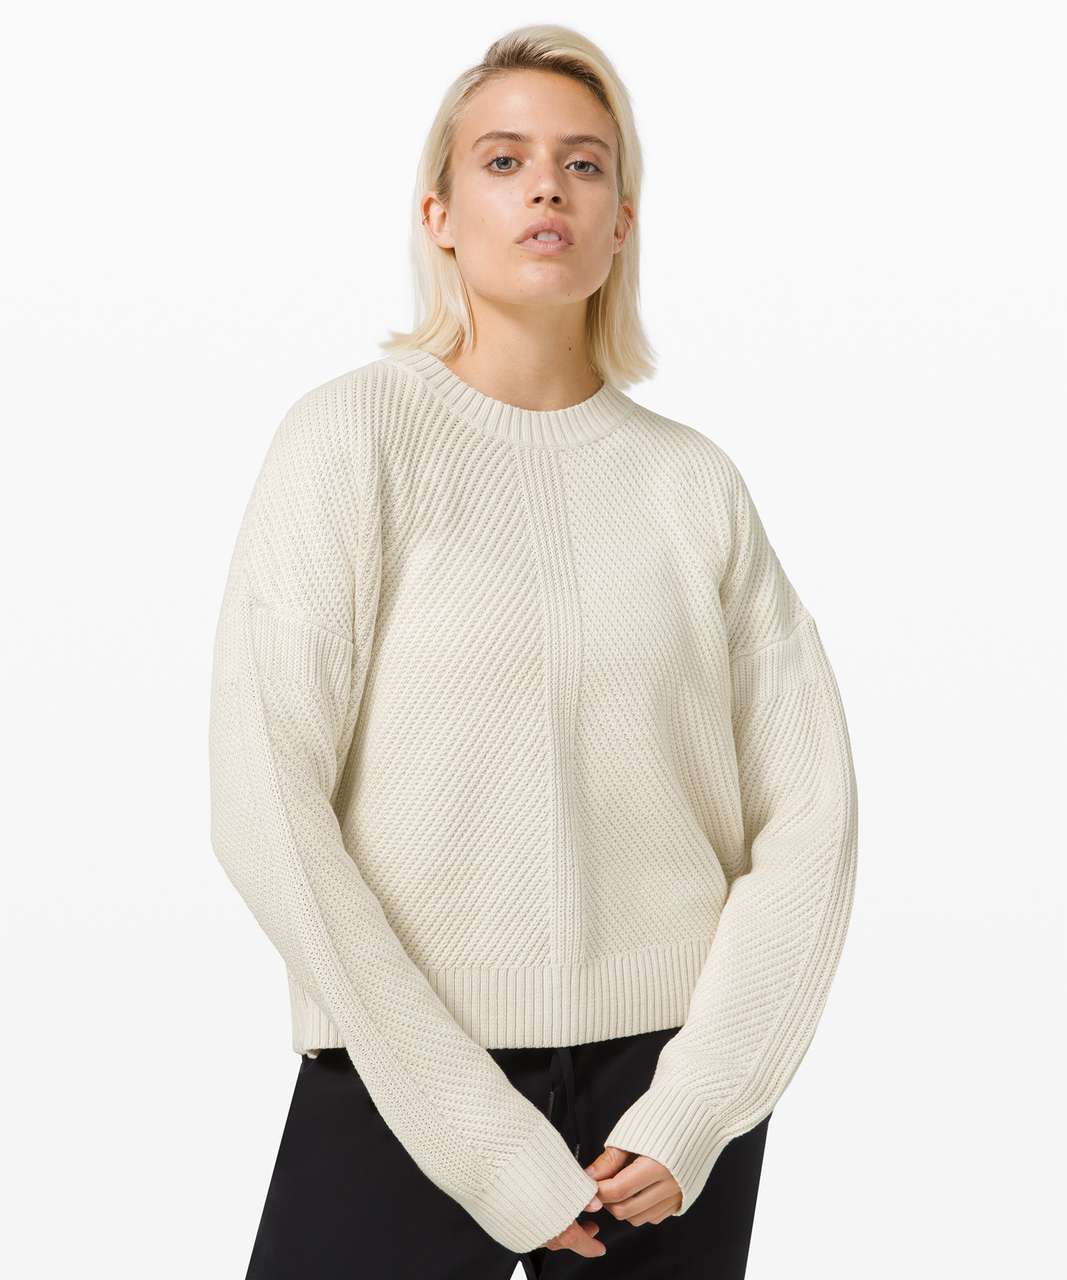 Lululemon New Heights Sweater - Antique White